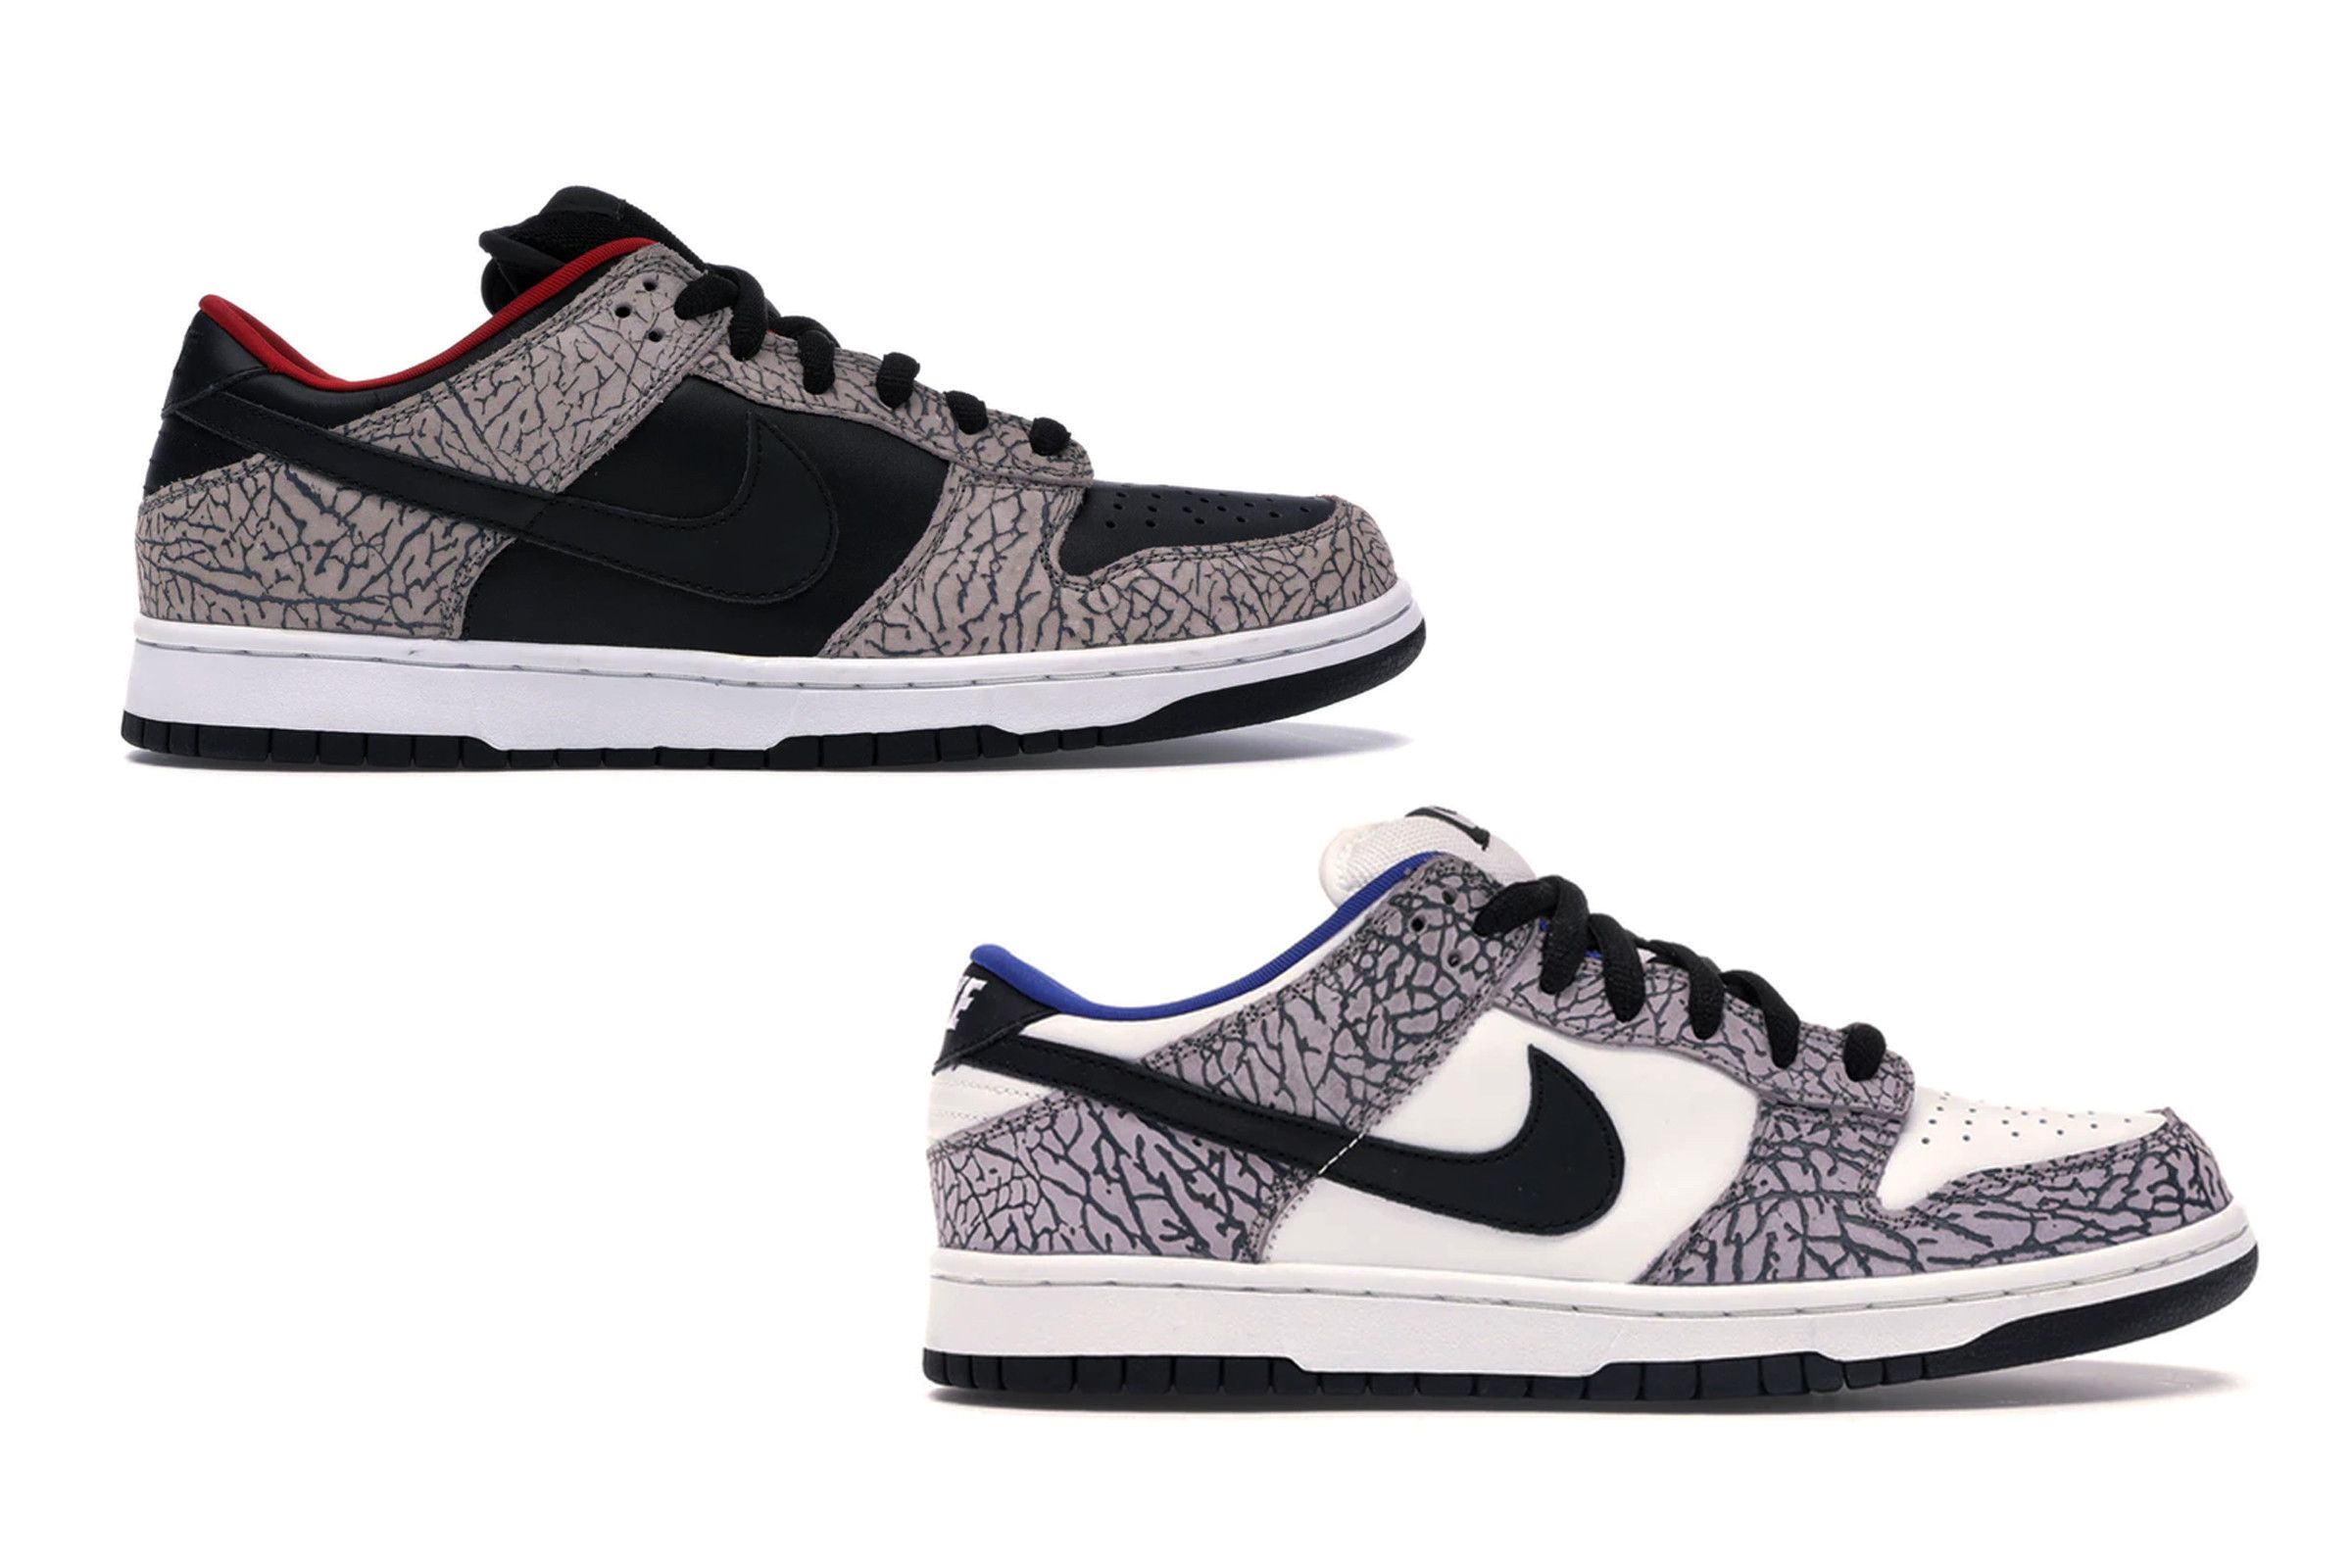 Supreme x Nike SB Dunk Low Pro “Black/Cement” and “White/Cement”